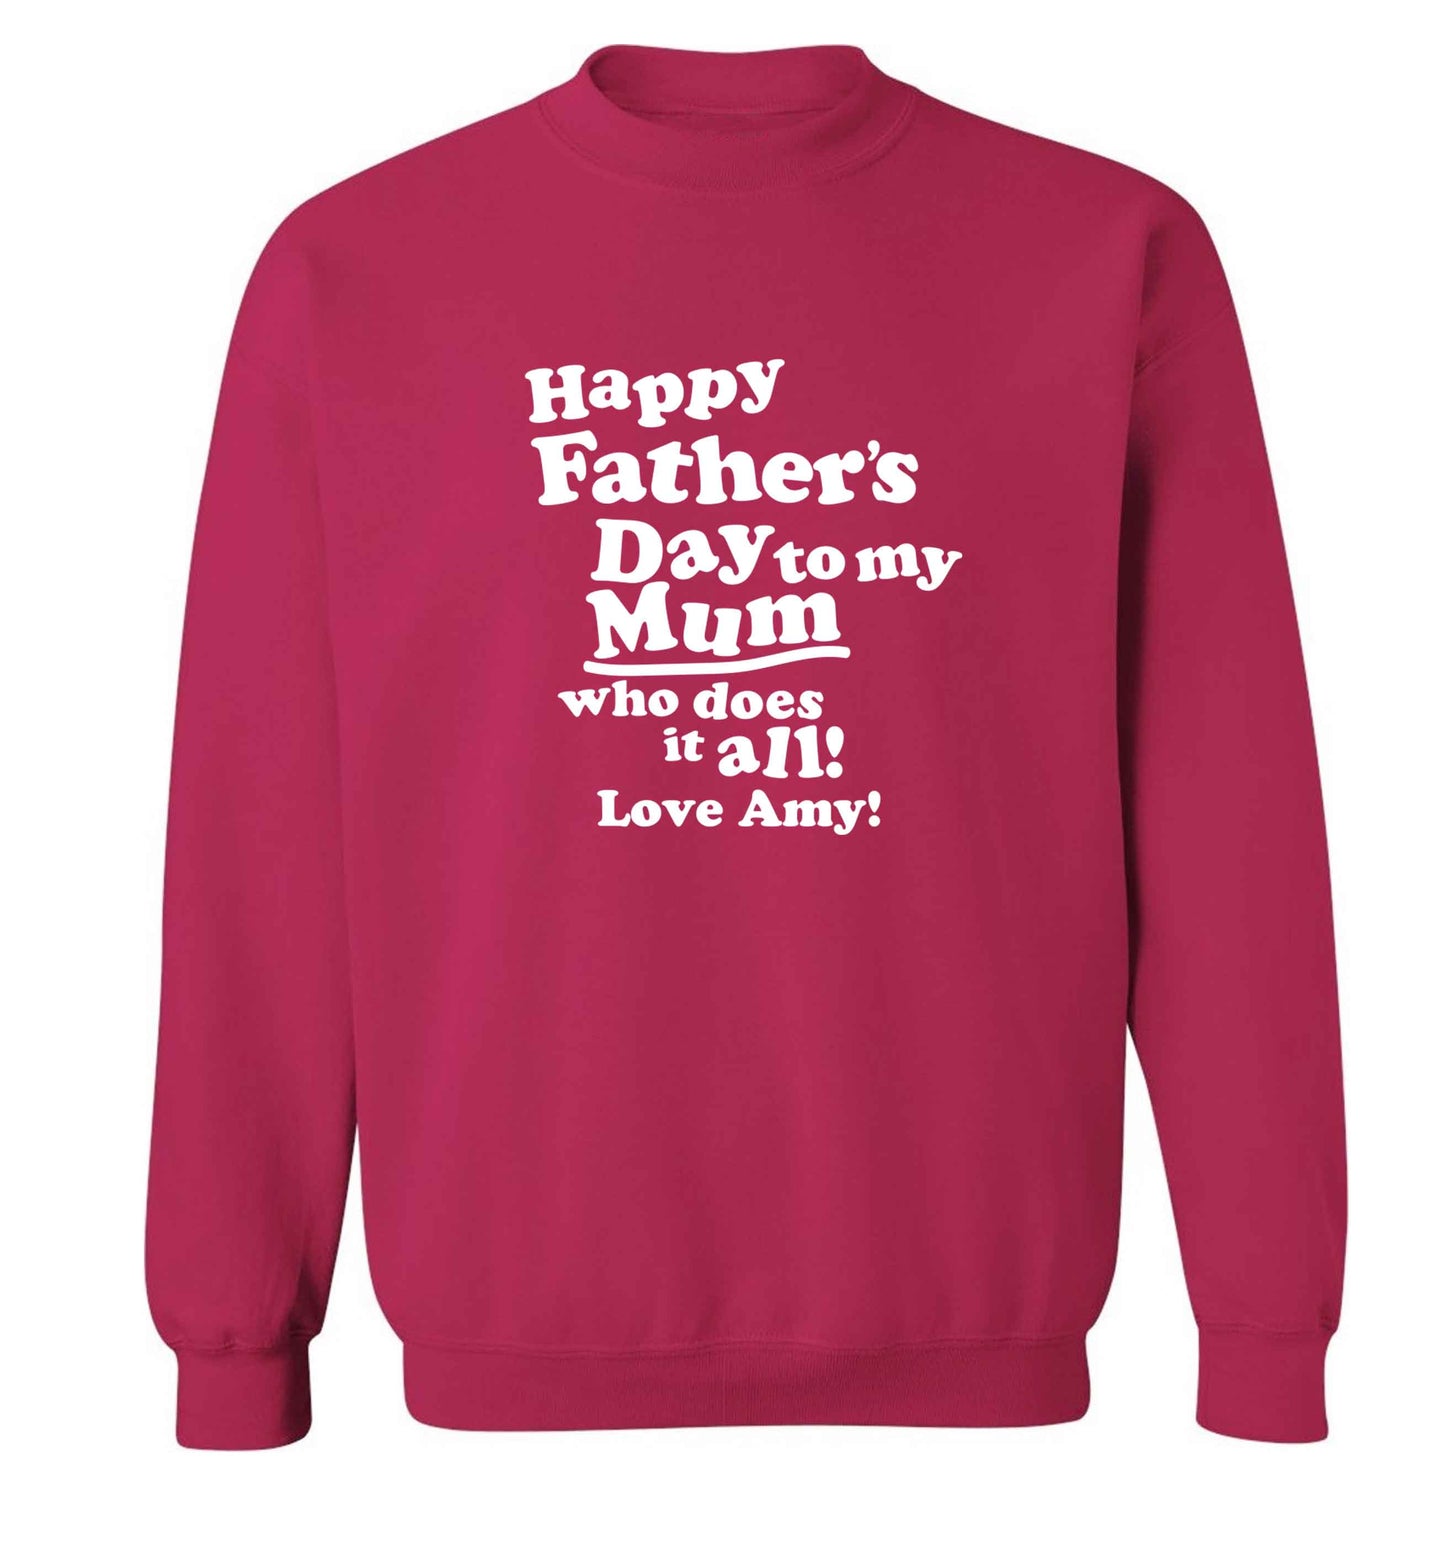 Happy Father's day to my mum who does it all adult's unisex pink sweater 2XL